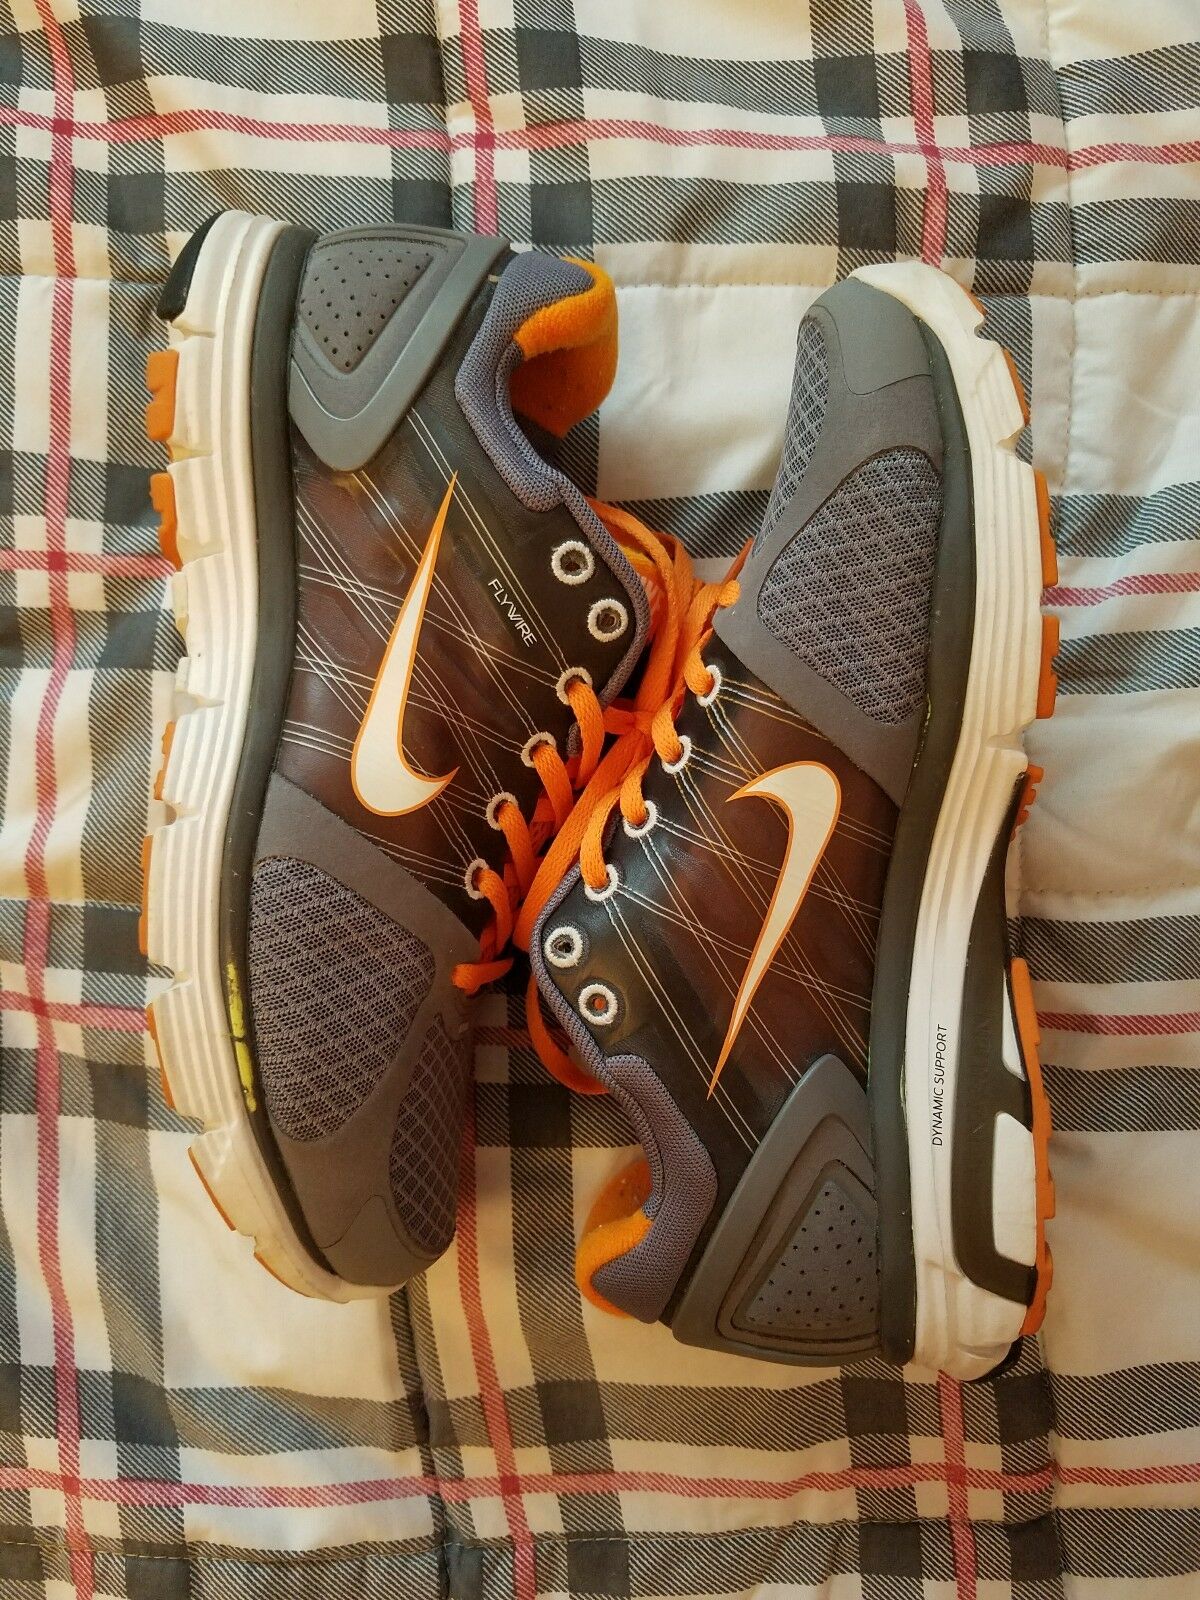 Nike Lunar Glade Grey/orange. Size 7.5 Women. Gently Used. Excellent Condition